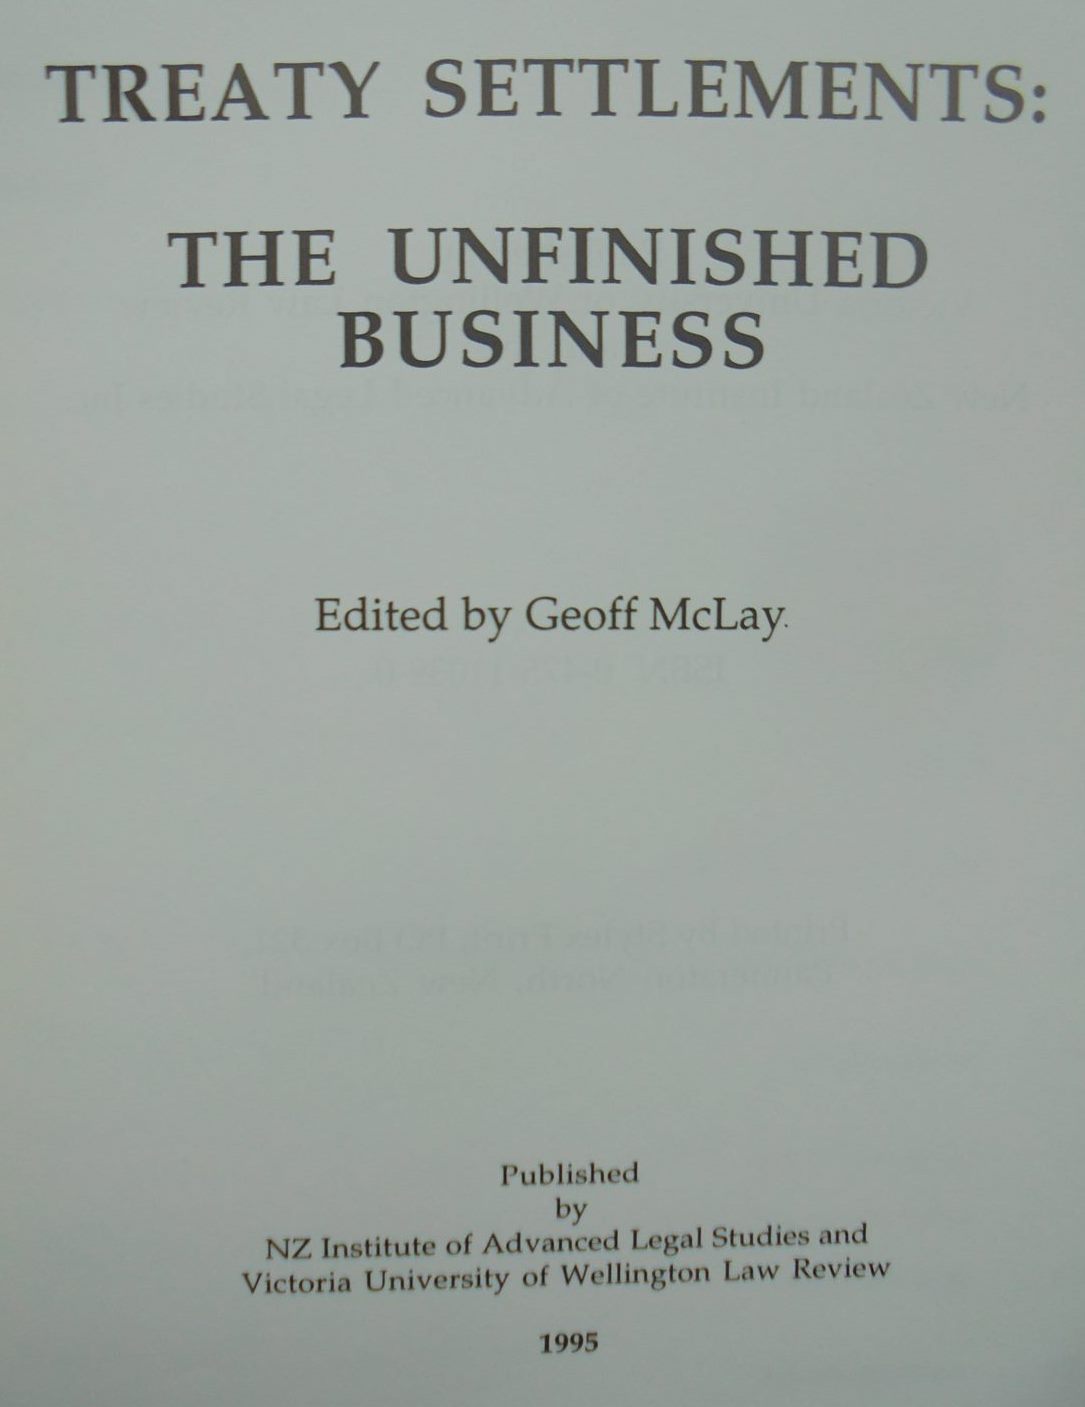 Treaty Settlements: The Unfinished Business. Edited by Geoff McLay